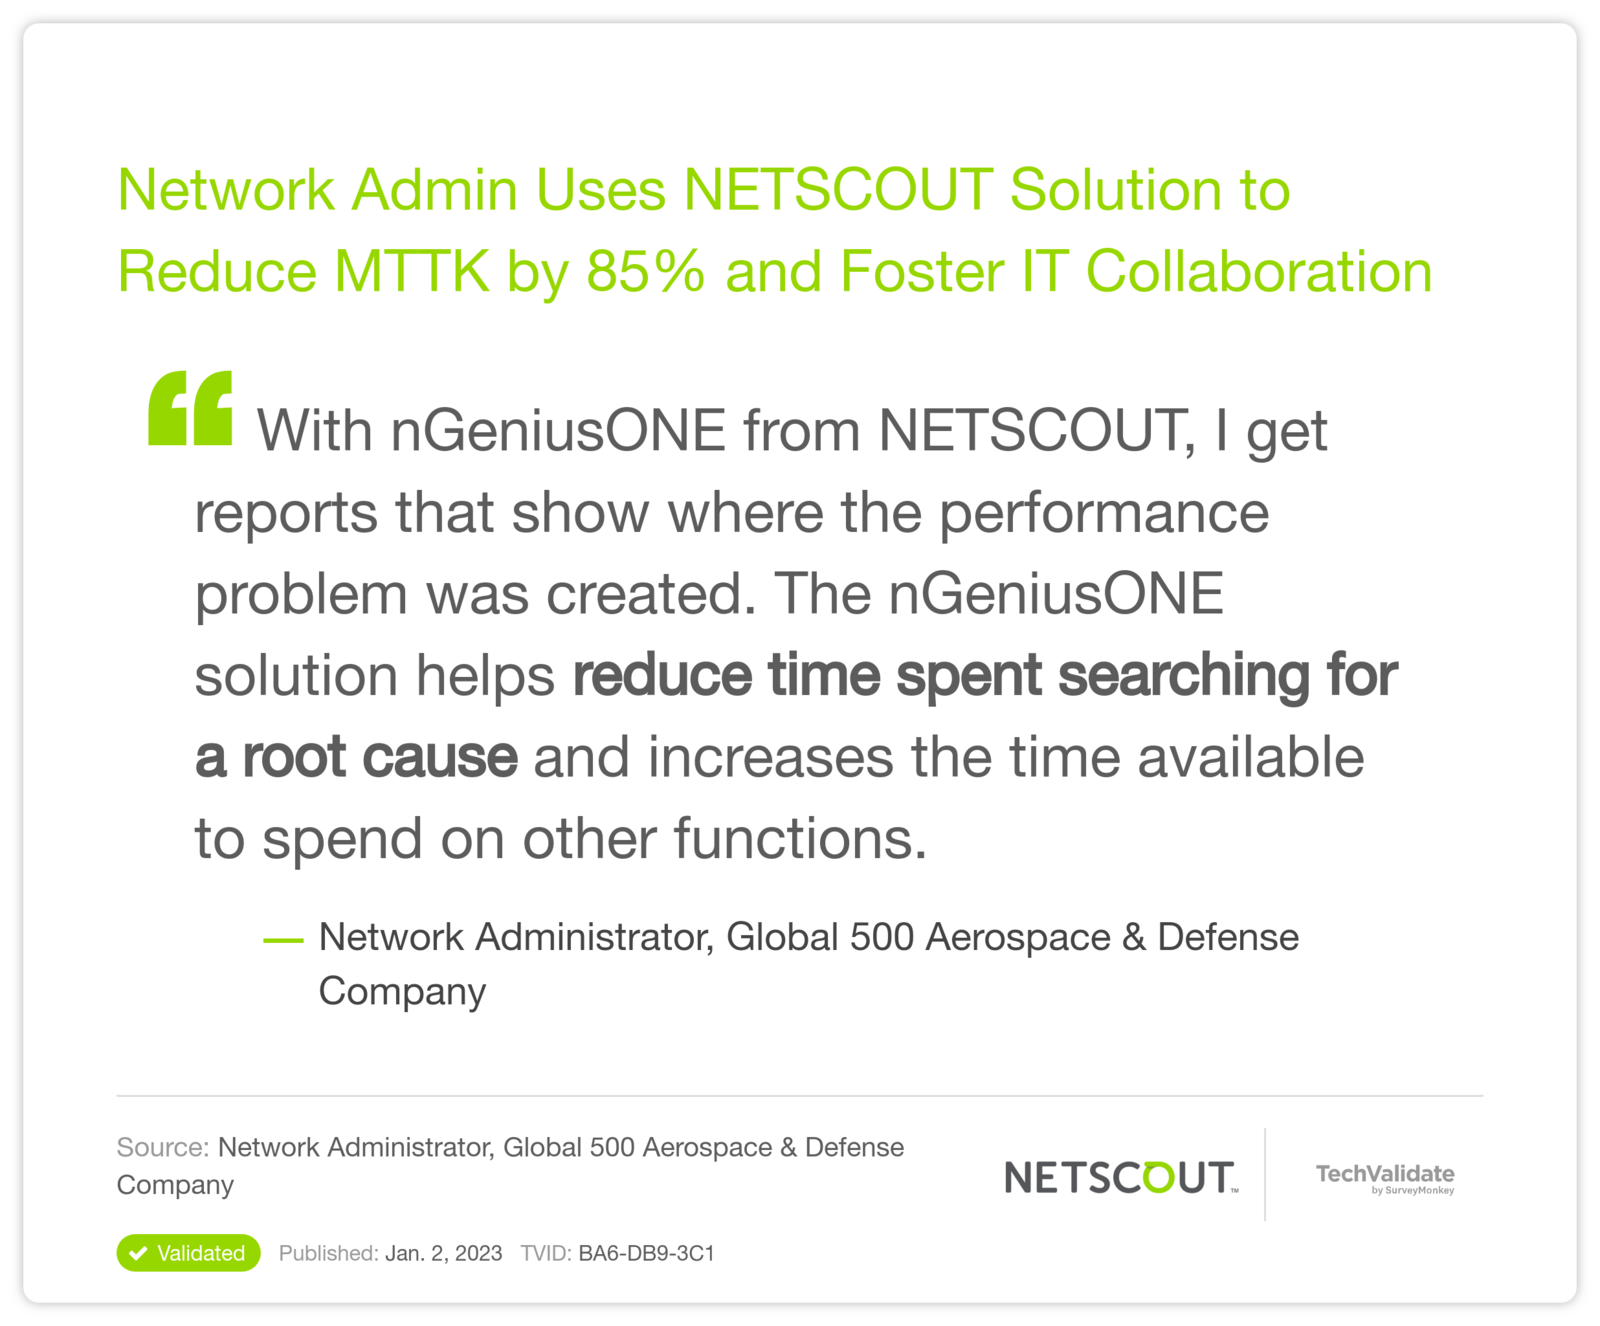 Network Admin Uses NETSCOUT Solution to Reduce MTTK by 85% and Foster IT Collaboration